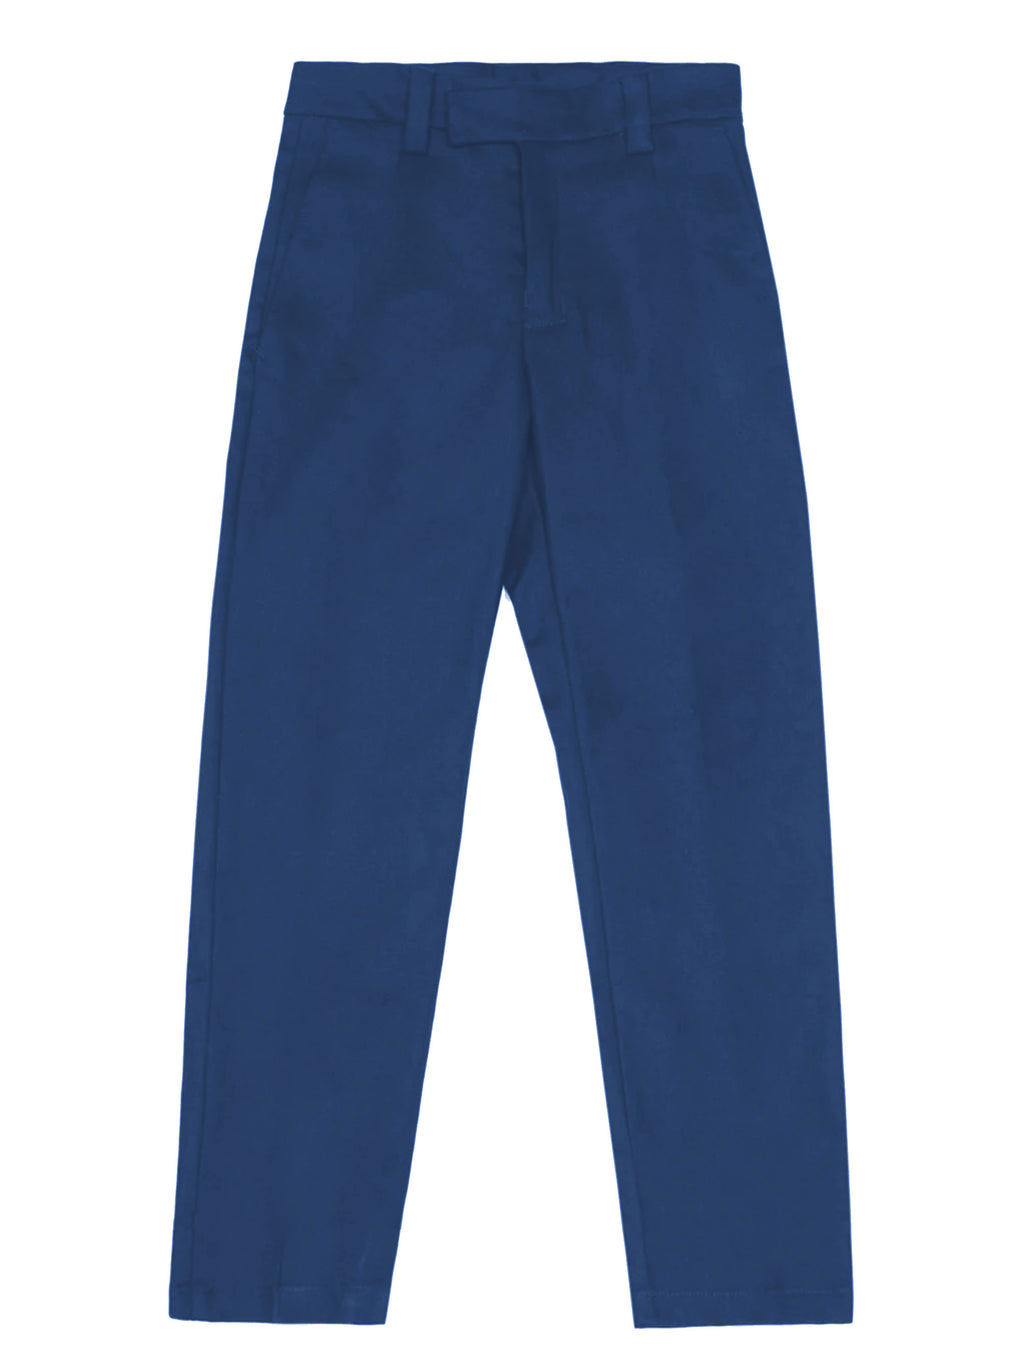 WELCOME RIVERS  100% Heavyweight Cotton Twill Pants